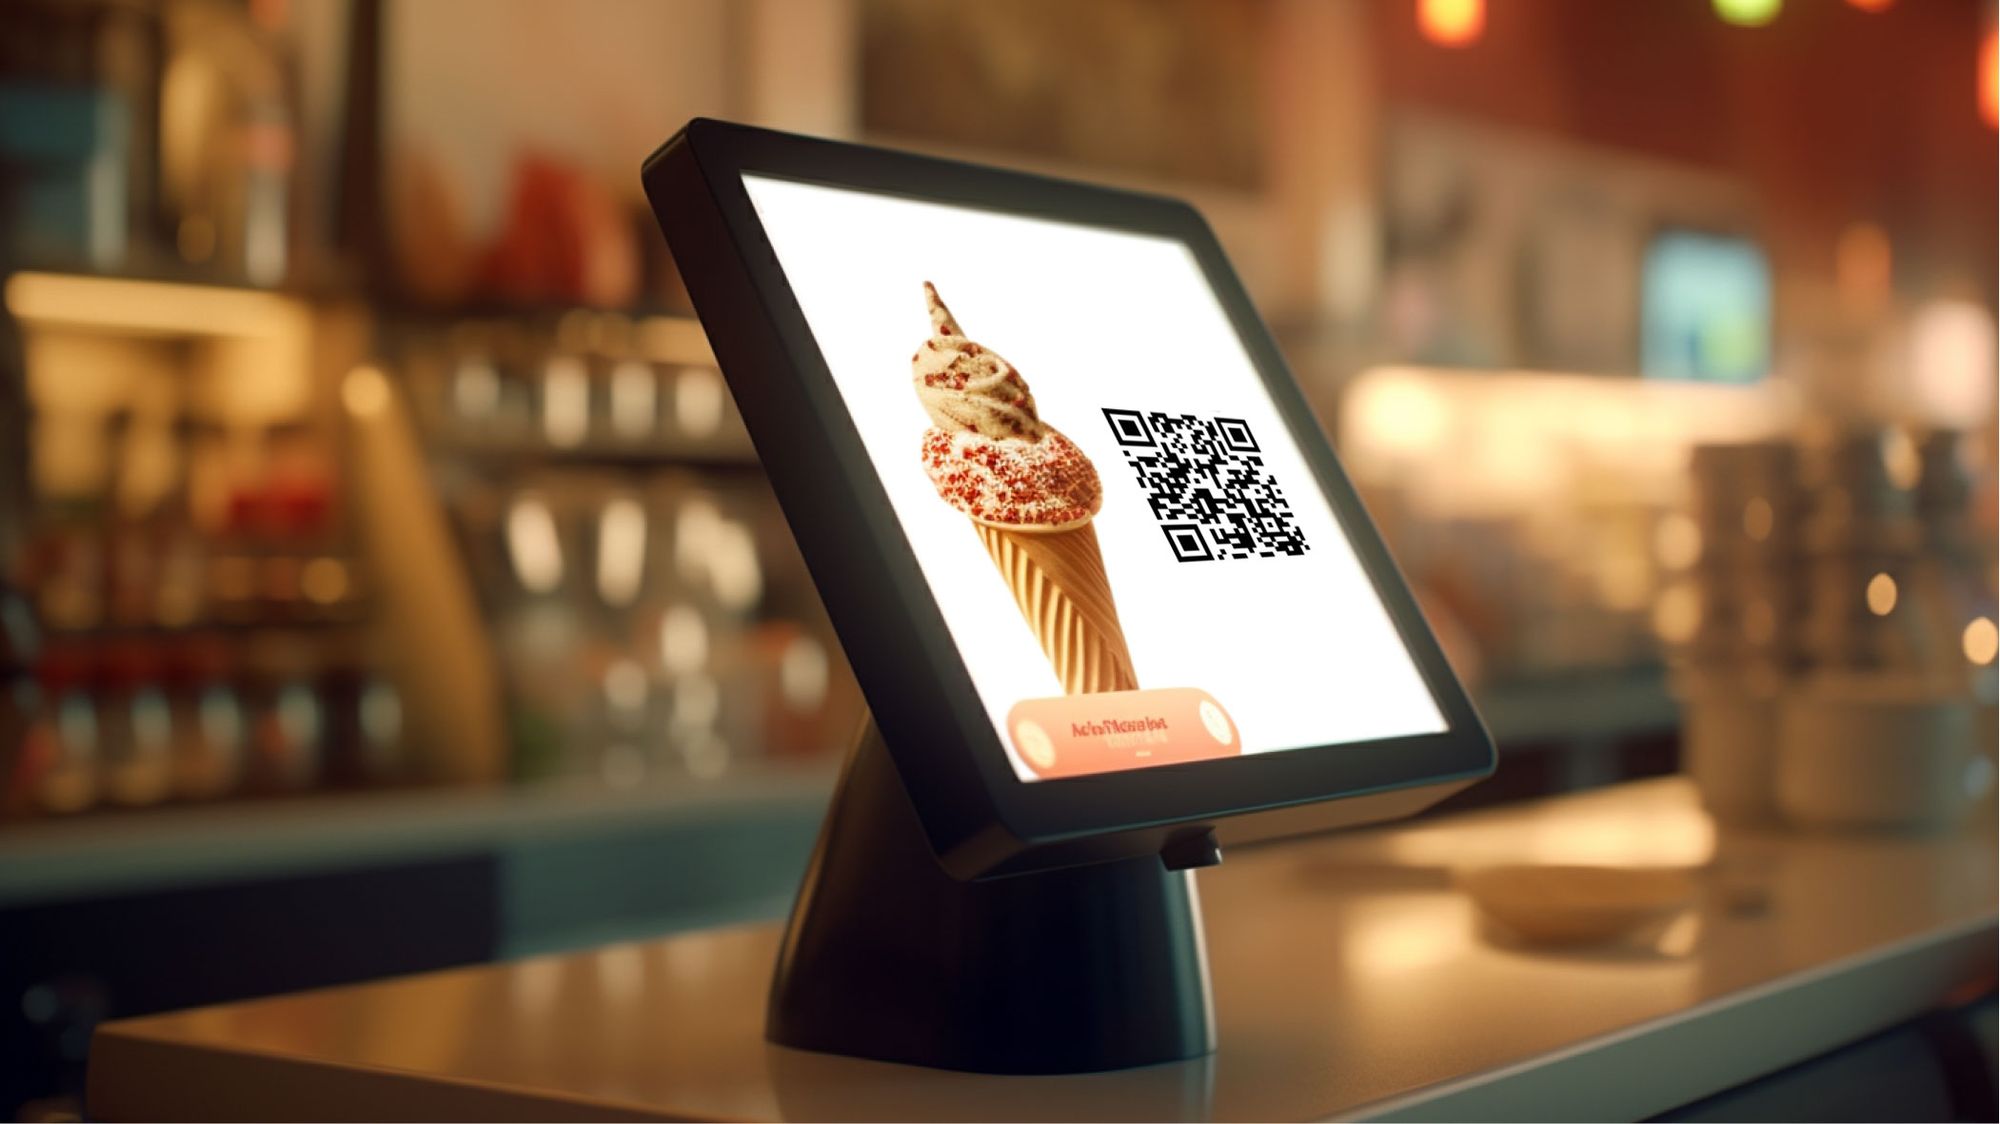 Choosing the best Point of Sale payment system for your business